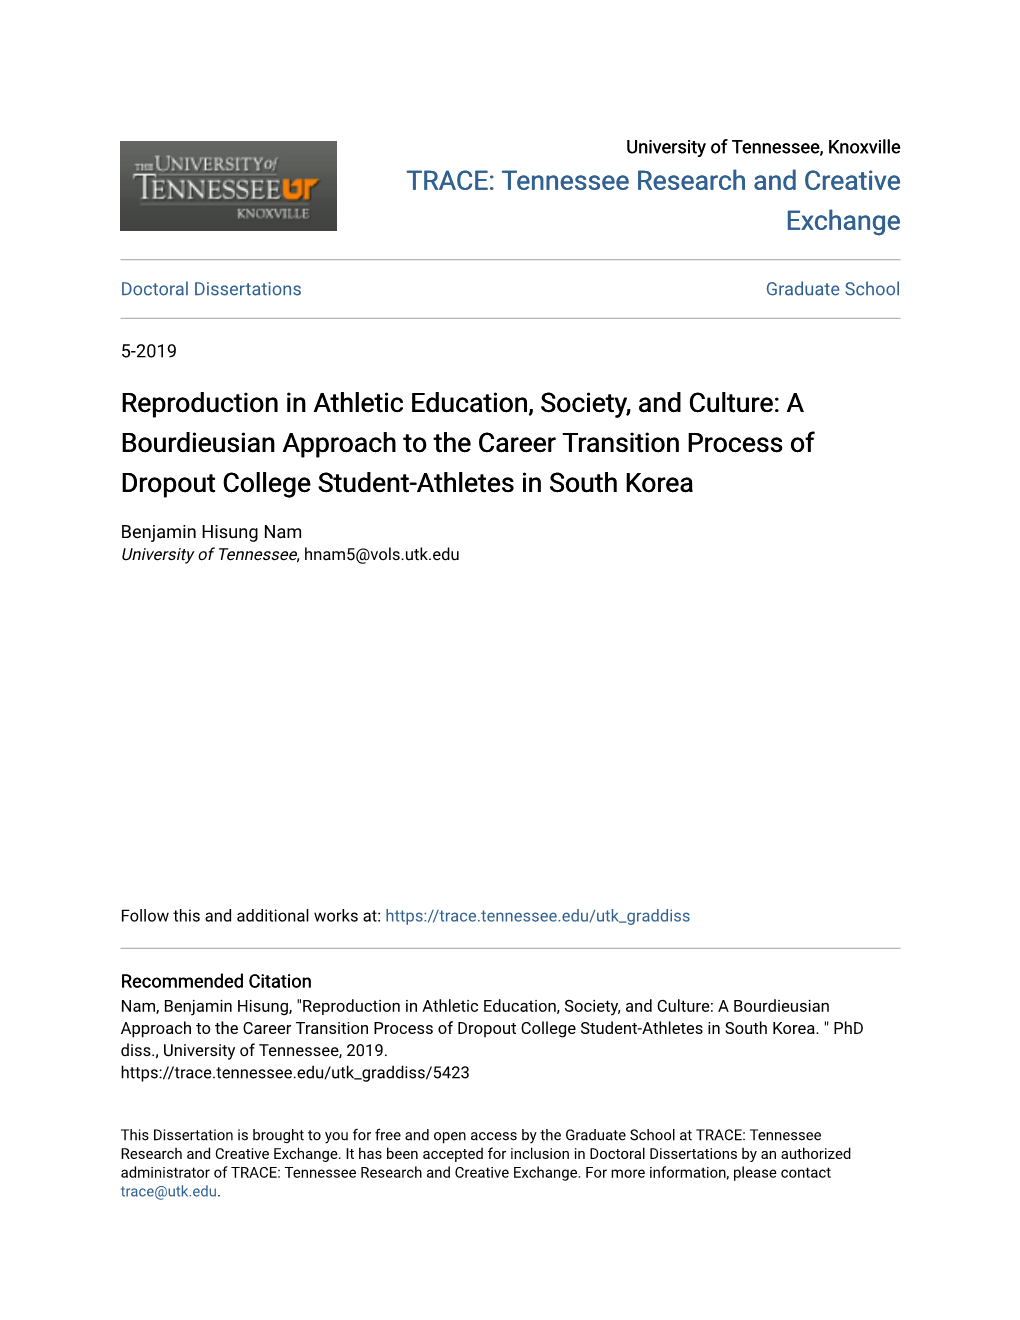 A Bourdieusian Approach to the Career Transition Process of Dropout College Student-Athletes in South Korea